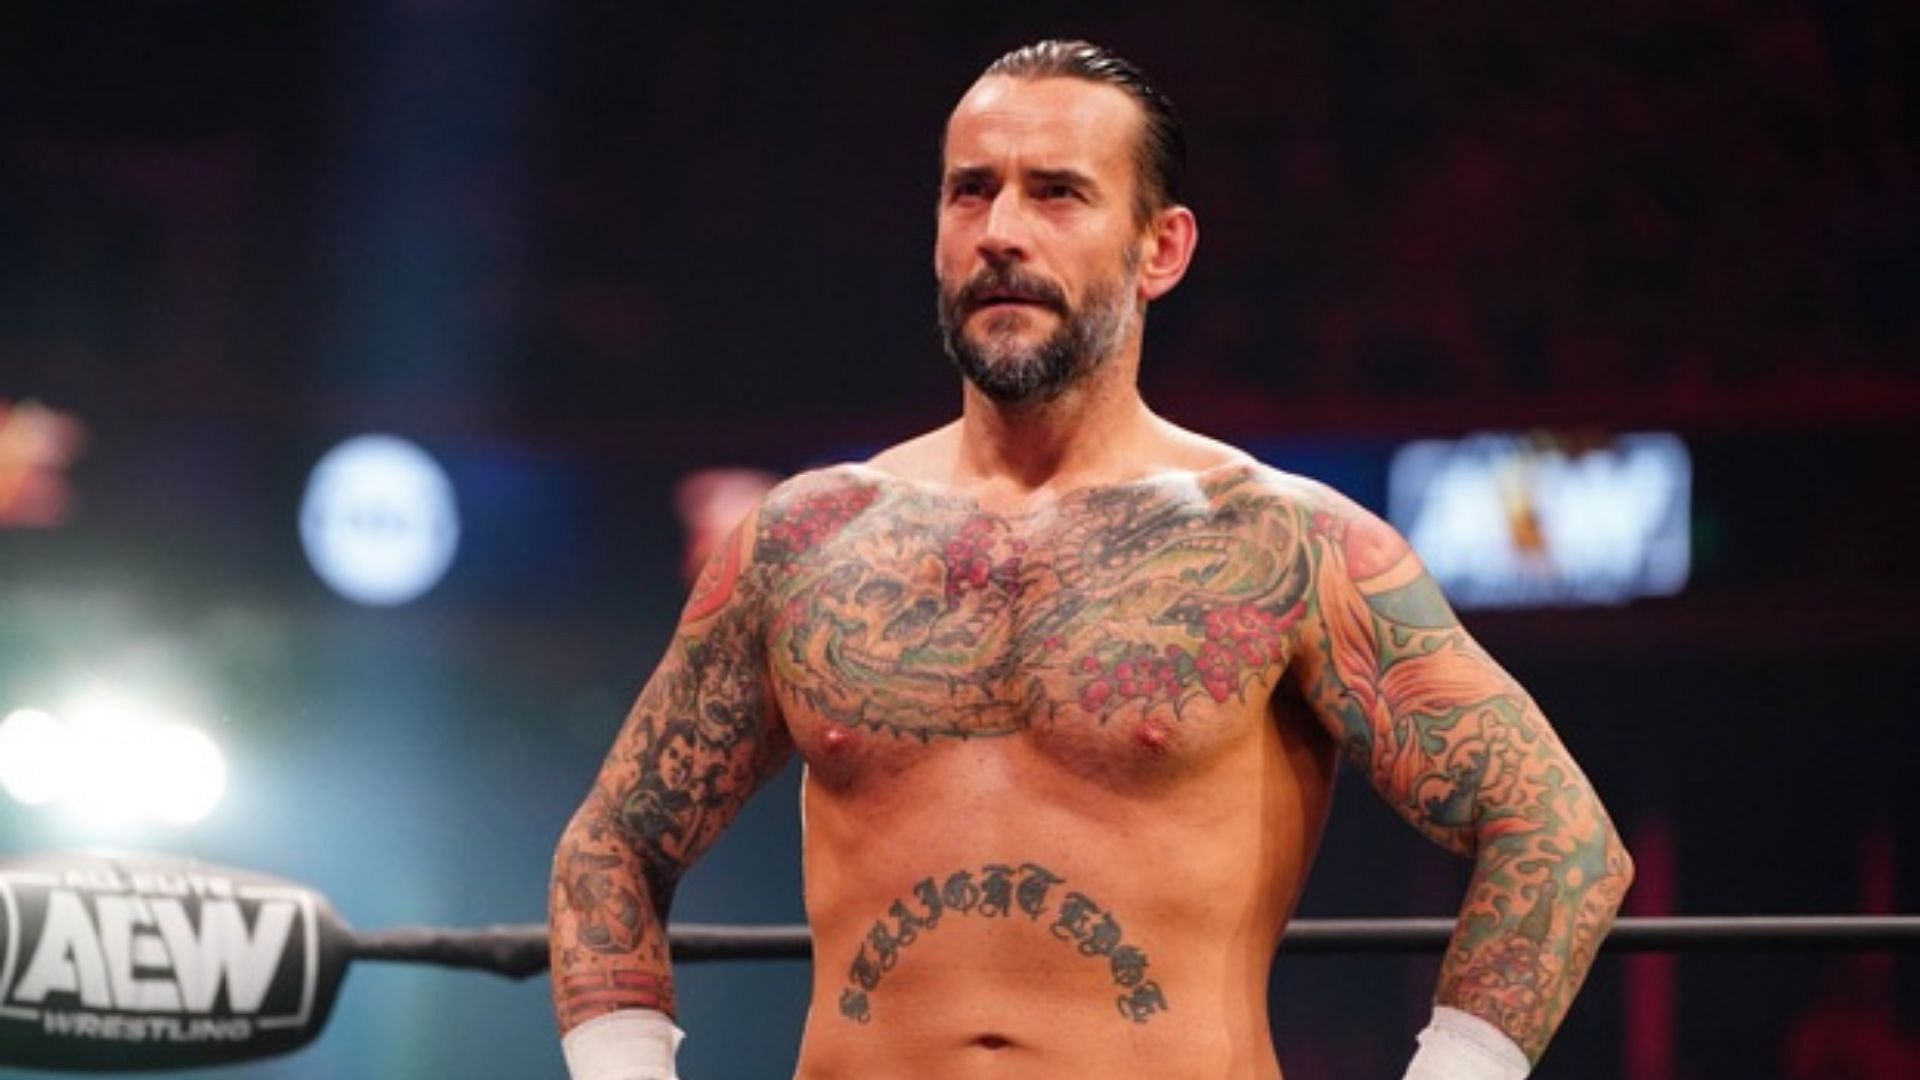 CM Punk at an AEW event in 2021